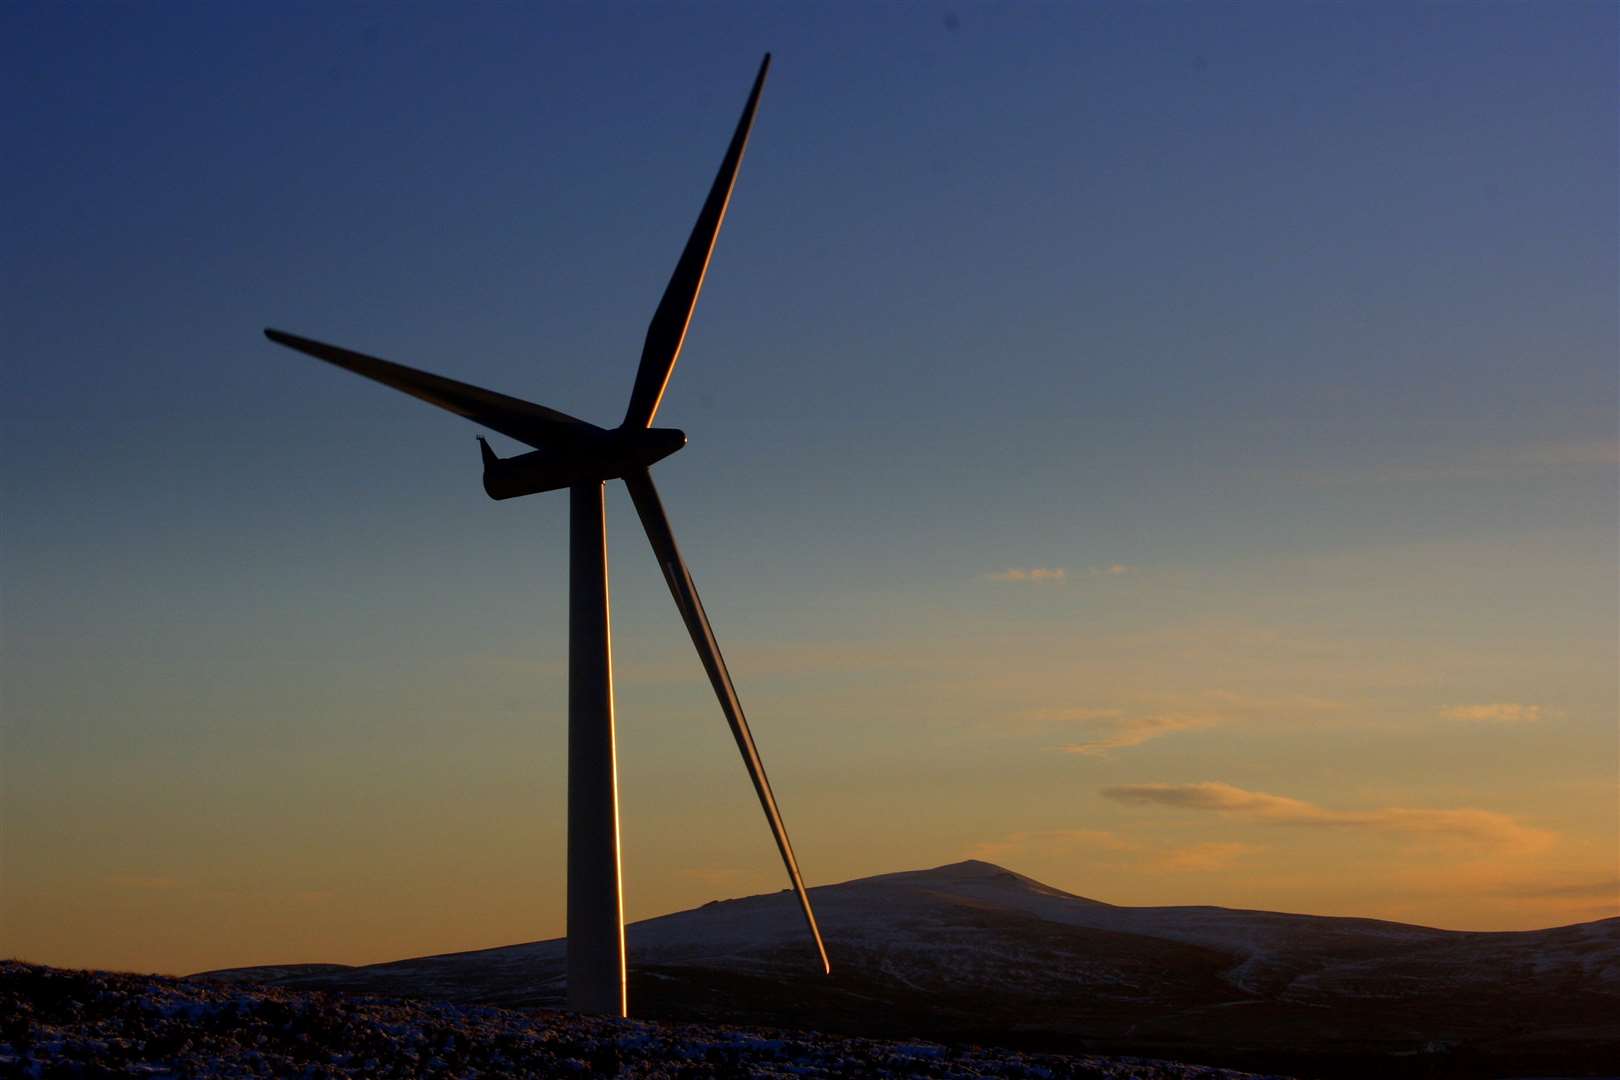 There are currently three separate plans at various stages of development to bring more turbines to the Loch Ness area.